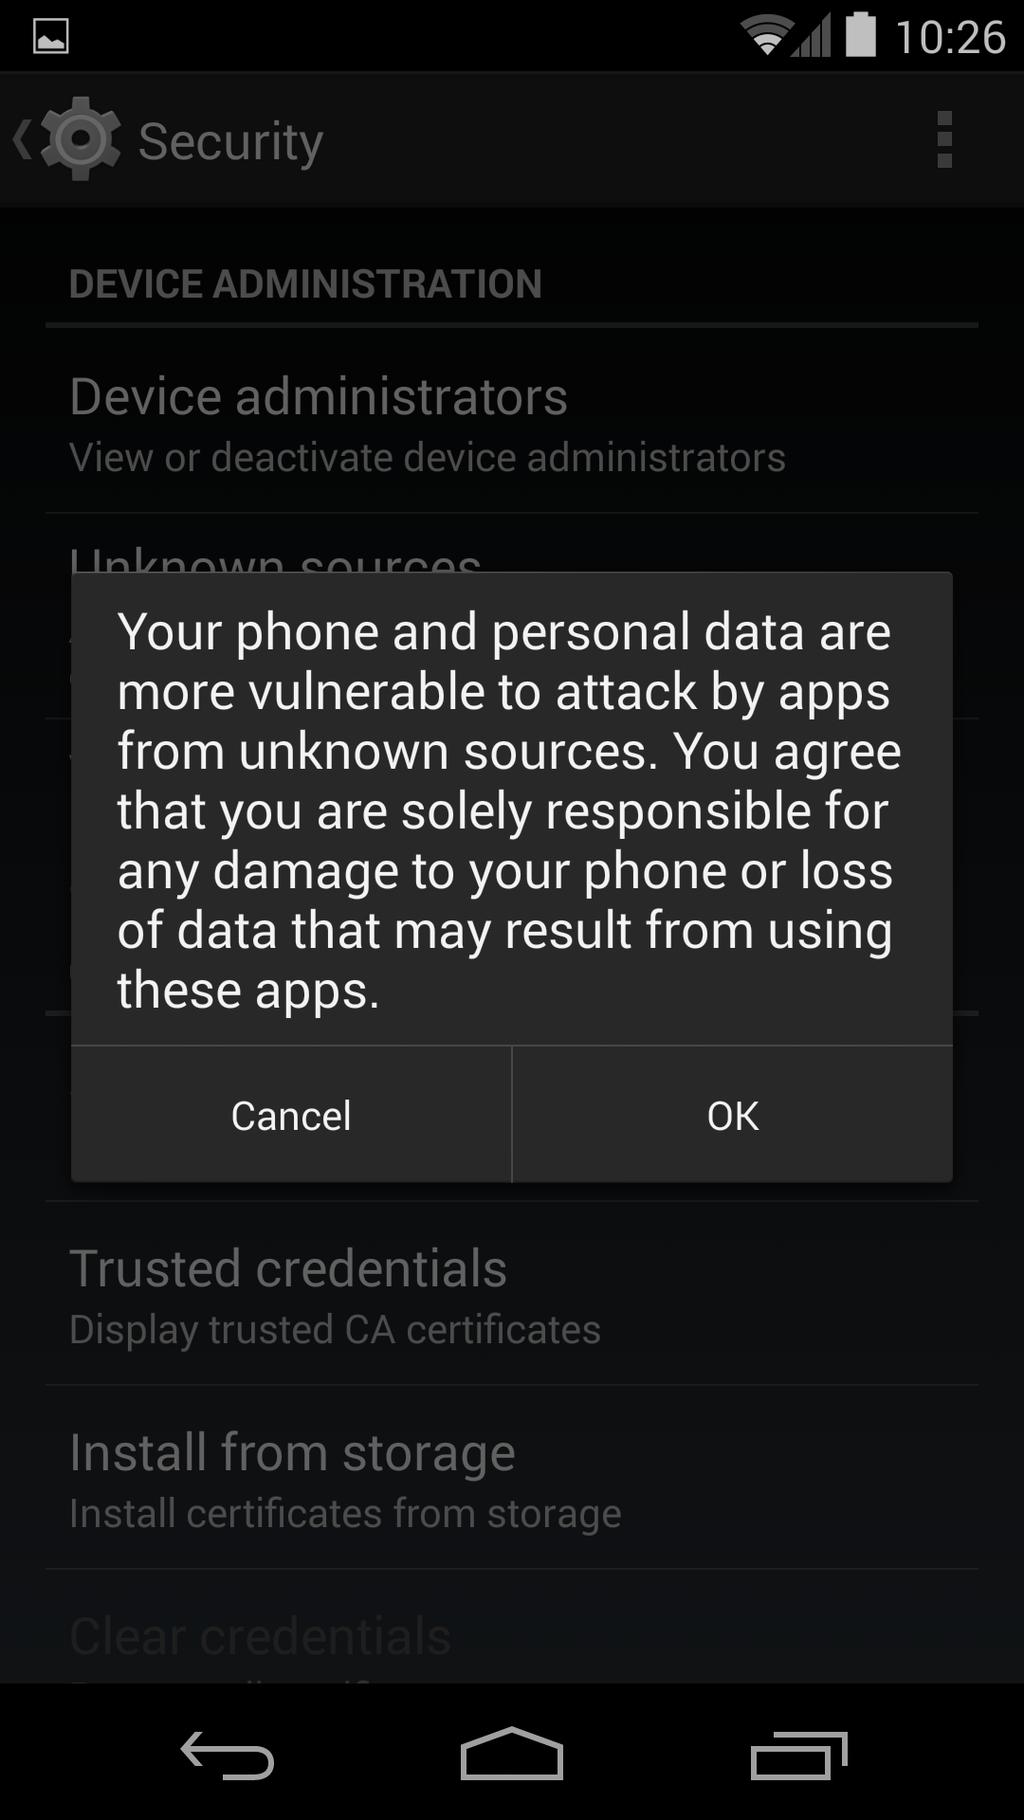 Android will display a caution message about the security implications of installing applications that have not been verified by Google. This setting must be accepted to enable the setting.